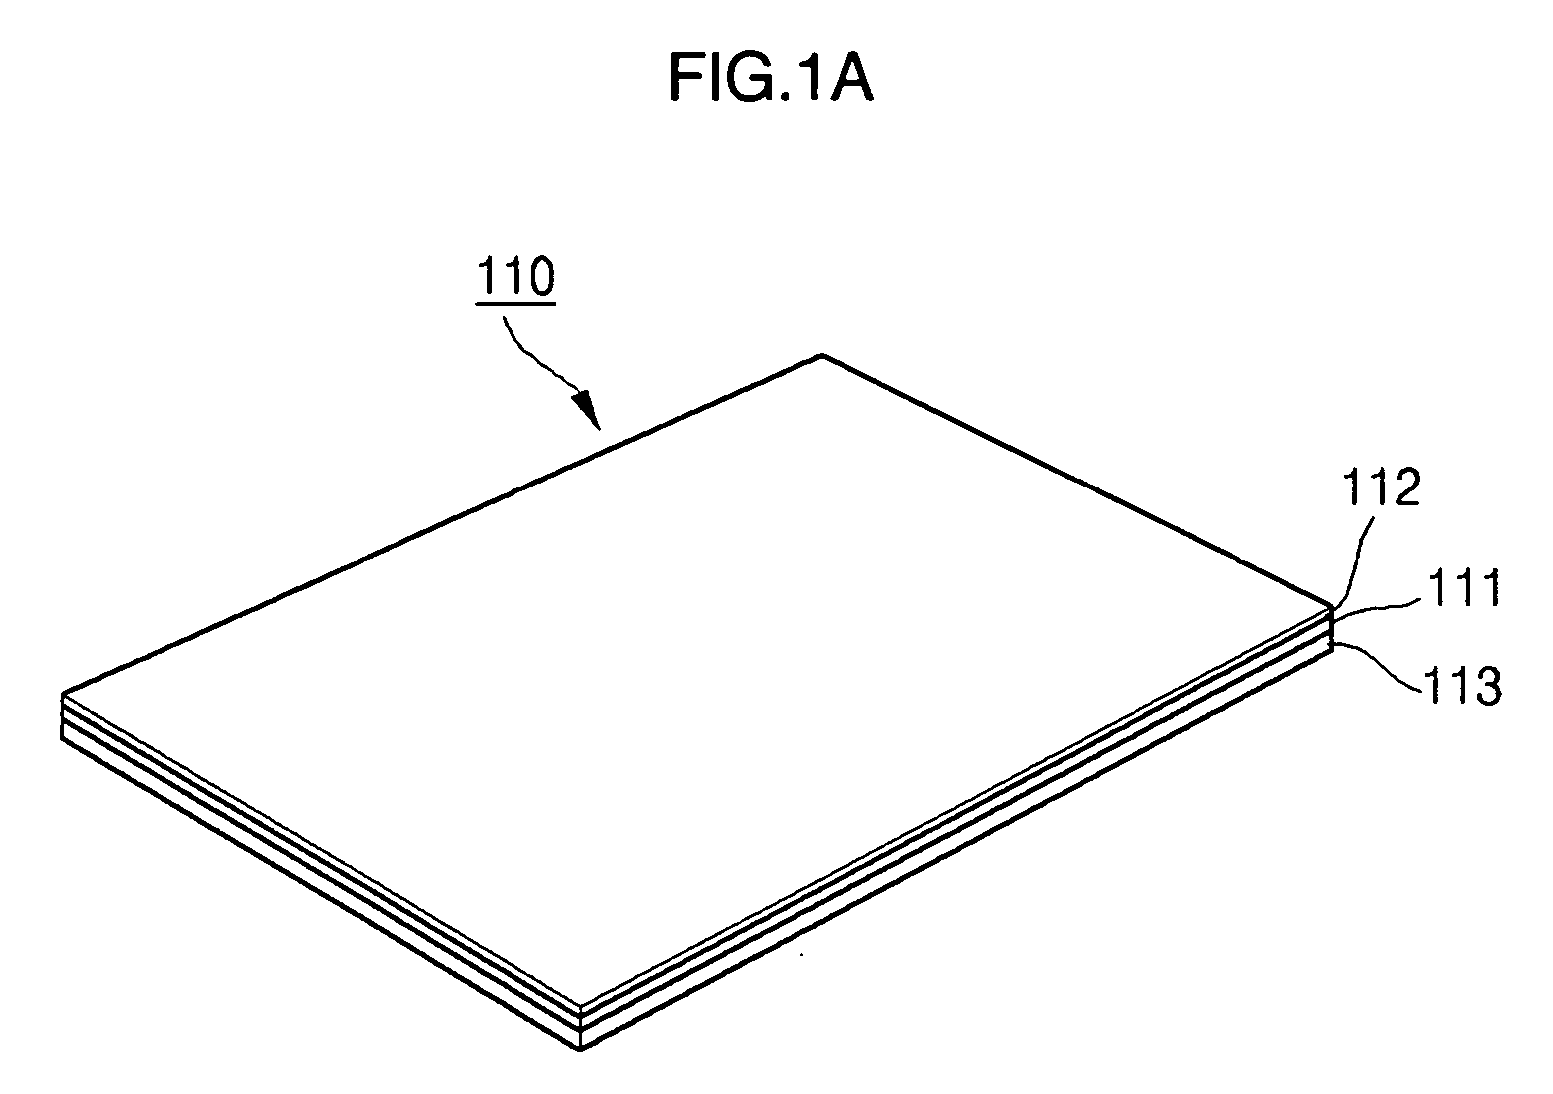 Battery sheath having radiation layer formed thereon and lithium polymer battery using the same